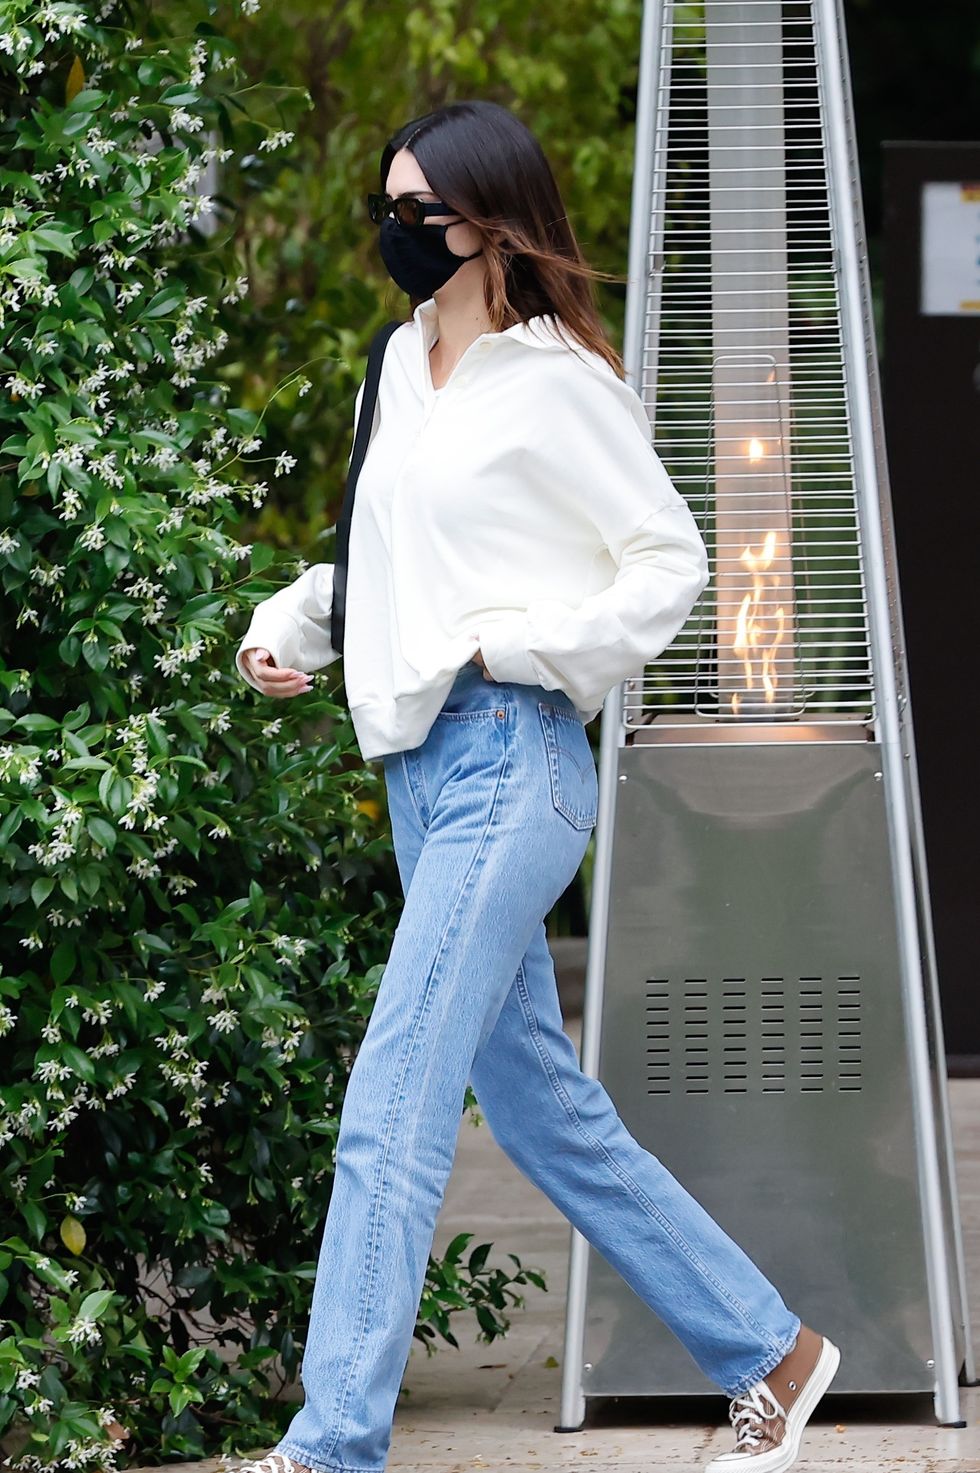 Kendall Jenner Wore the Cutest Converse and Now I'm Itching for a New Pair